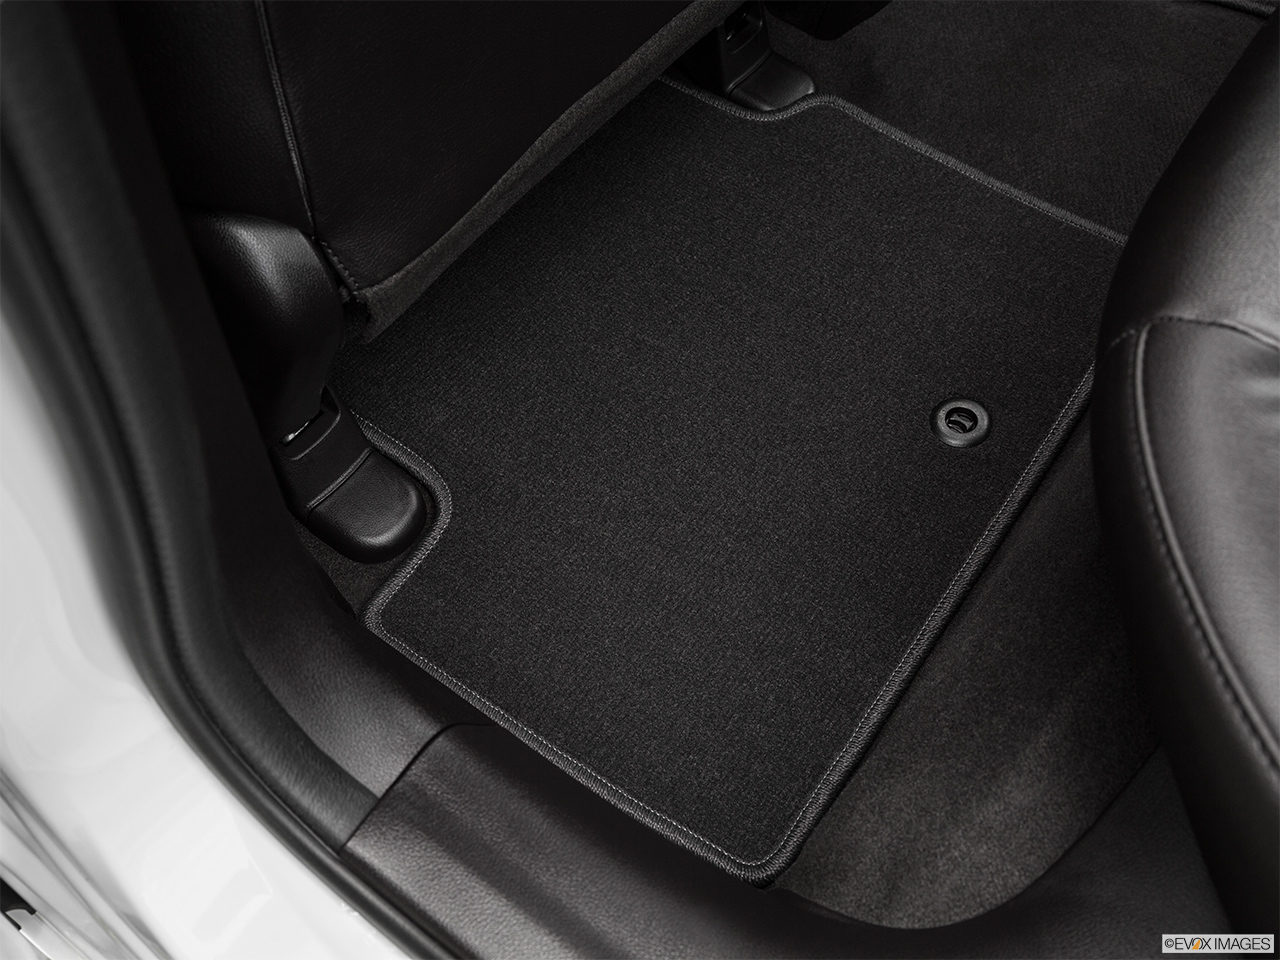 2016 Acura ILX AcuraWatch Plus Rear driver's side floor mat. Mid-seat level from outside looking in. 